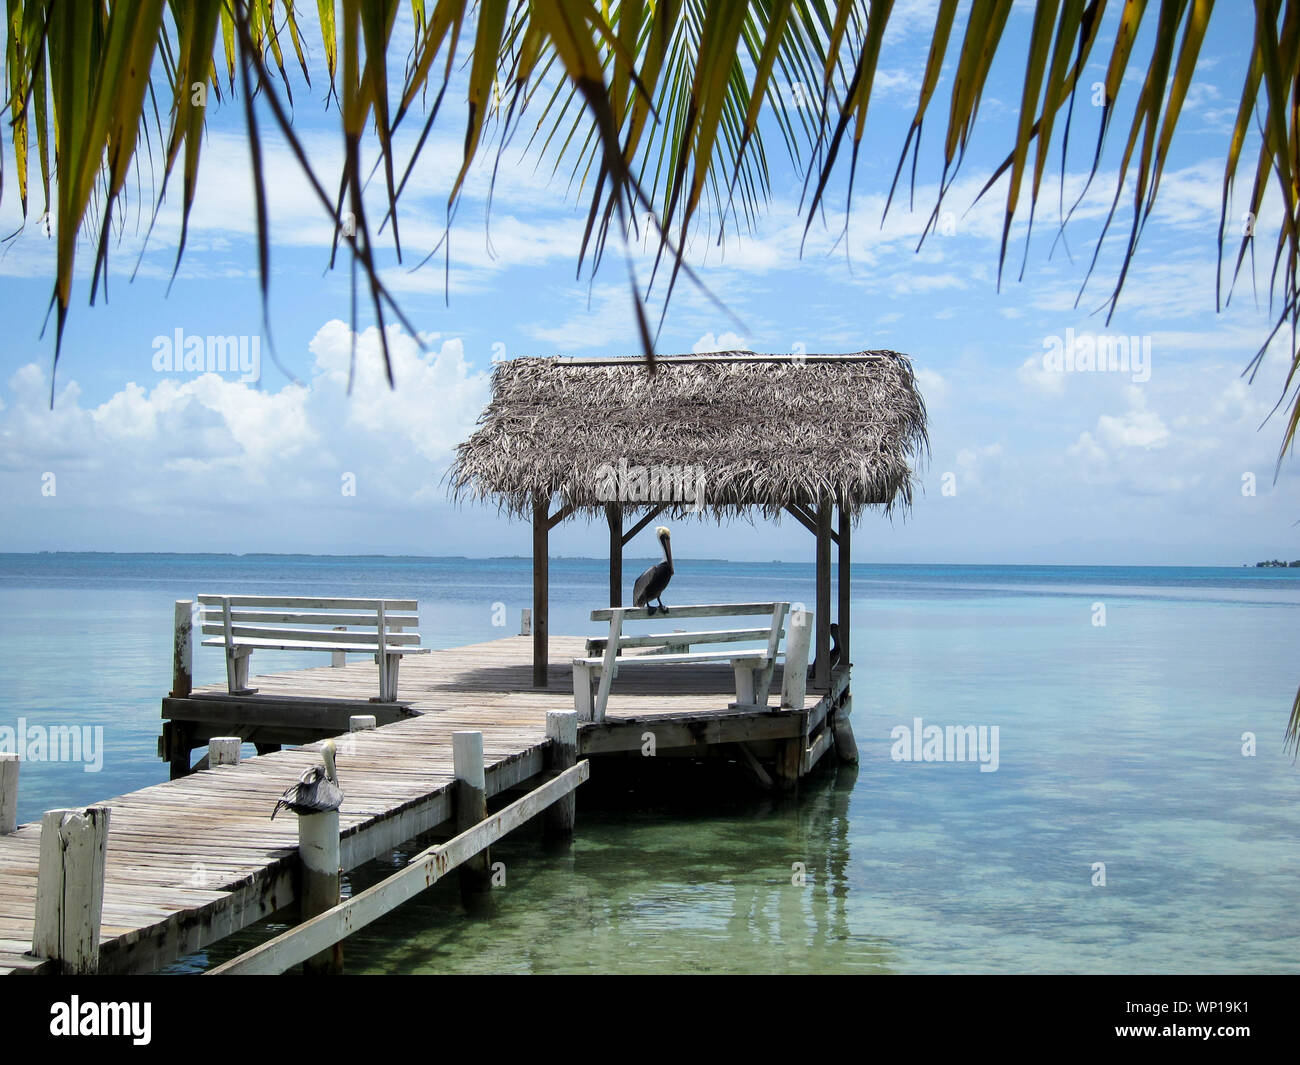 Belize Cayes, Pier on Tropical Island Paradise in Belize Stock Photo